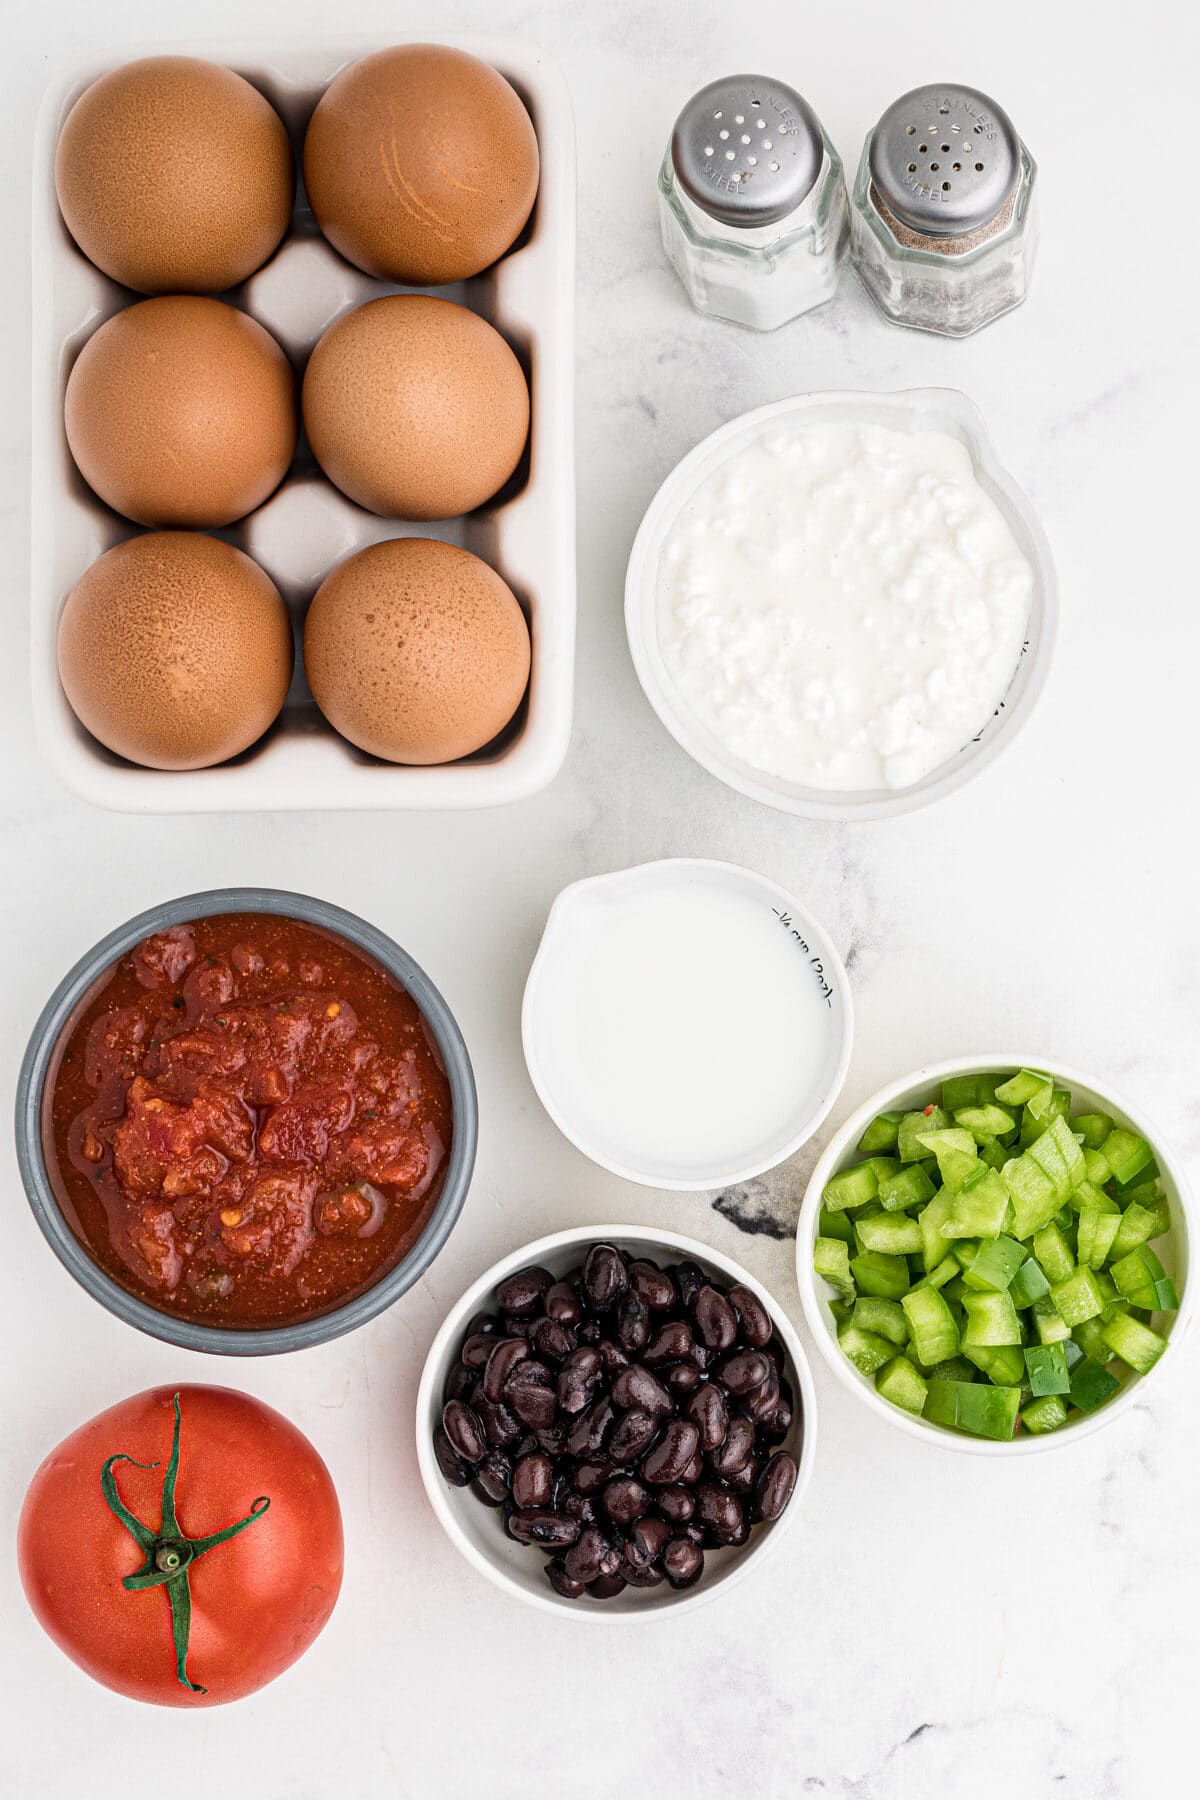 ingredients for spanish egg cups with salsa, tomato, black beans, green bell peppers